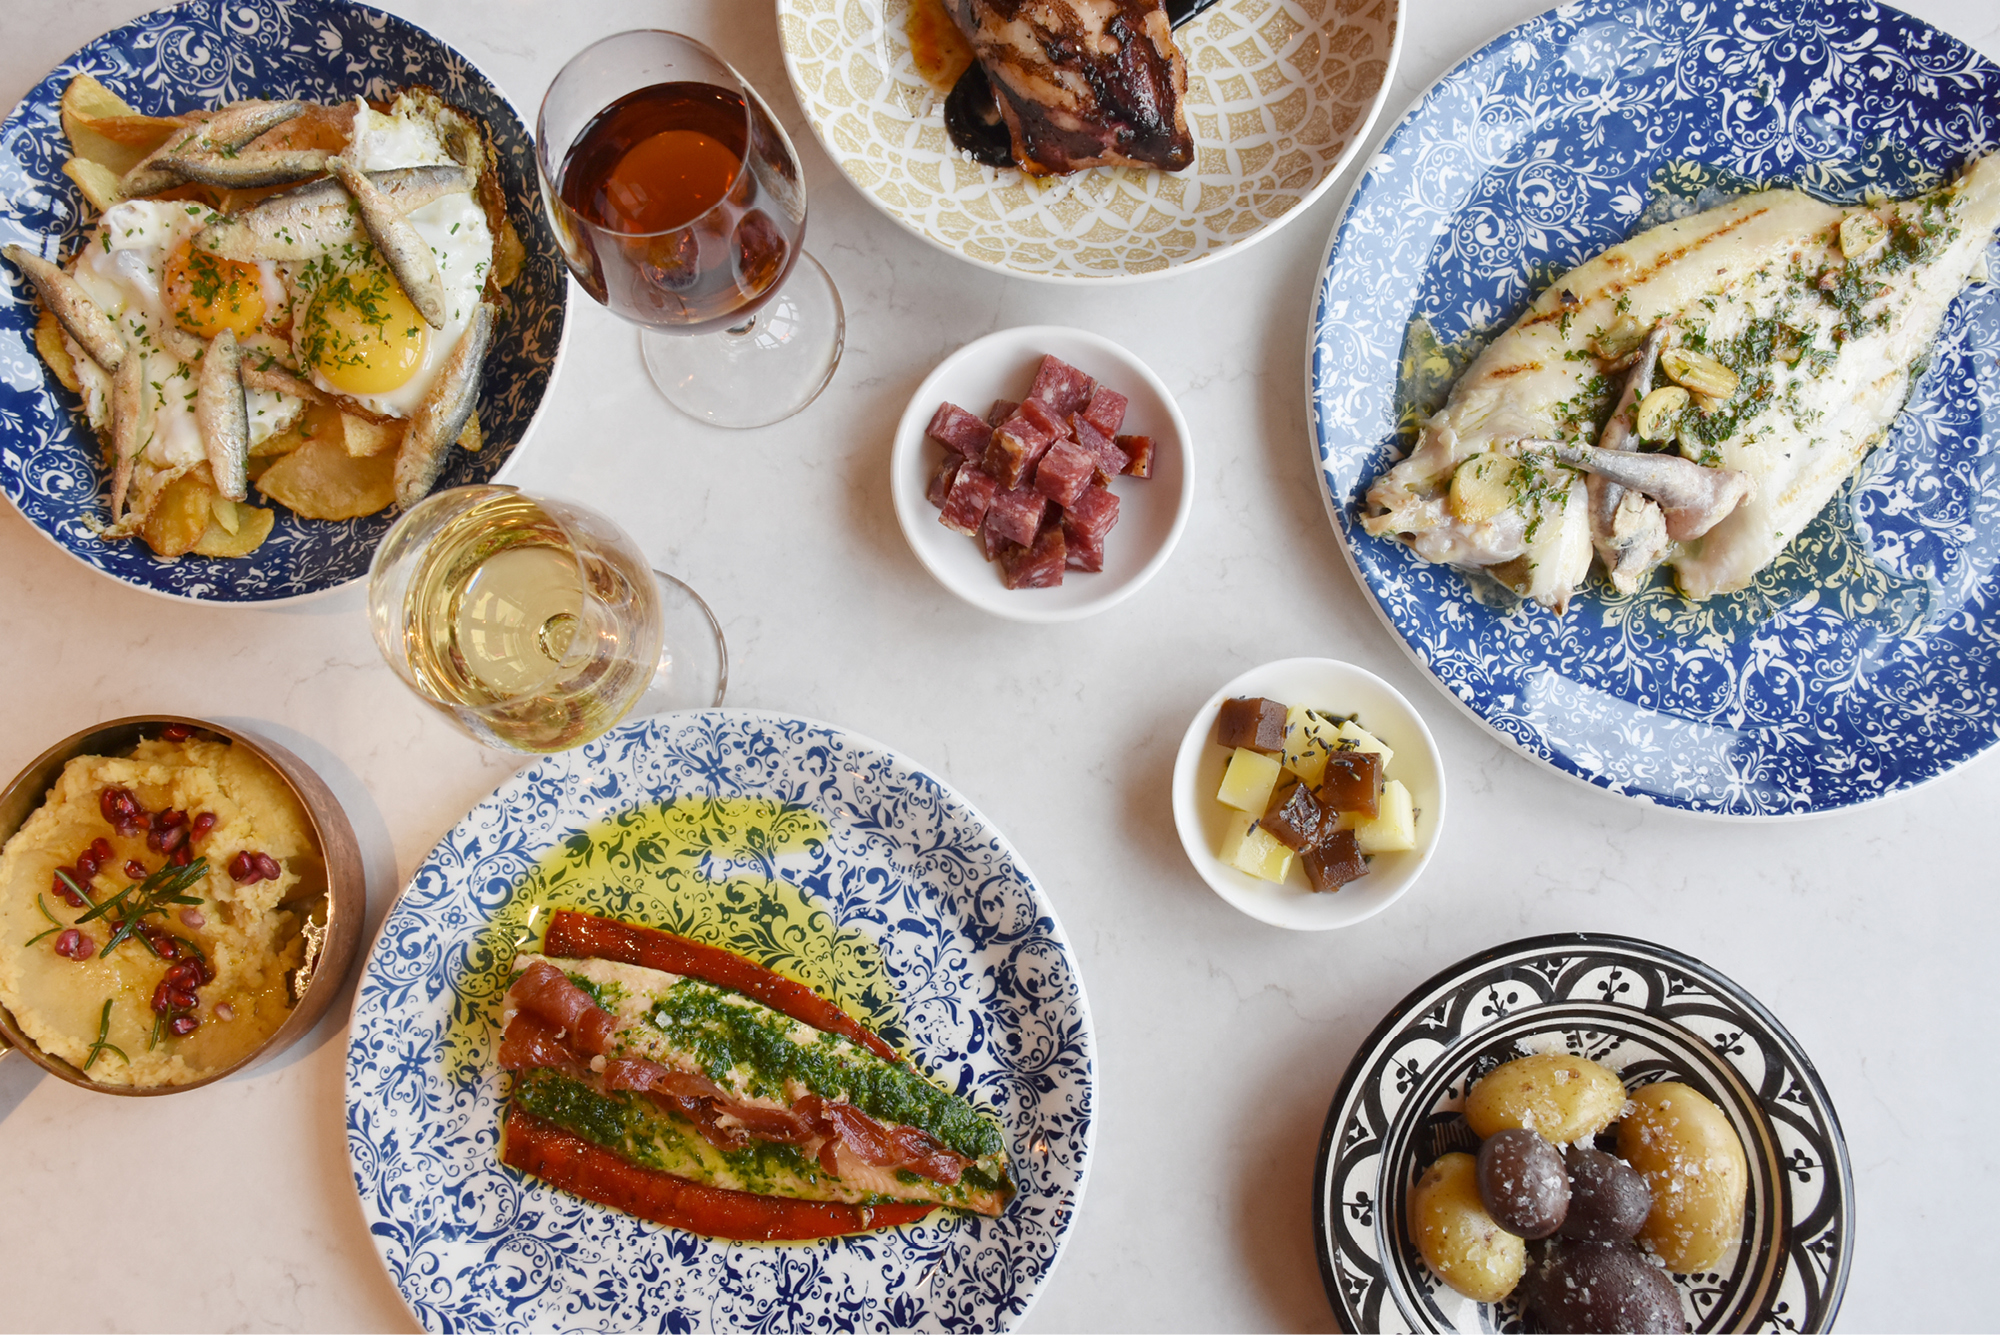 Brindisa offers a selection of traditional Spanish cuisine when dinning in, served in small or large plates.